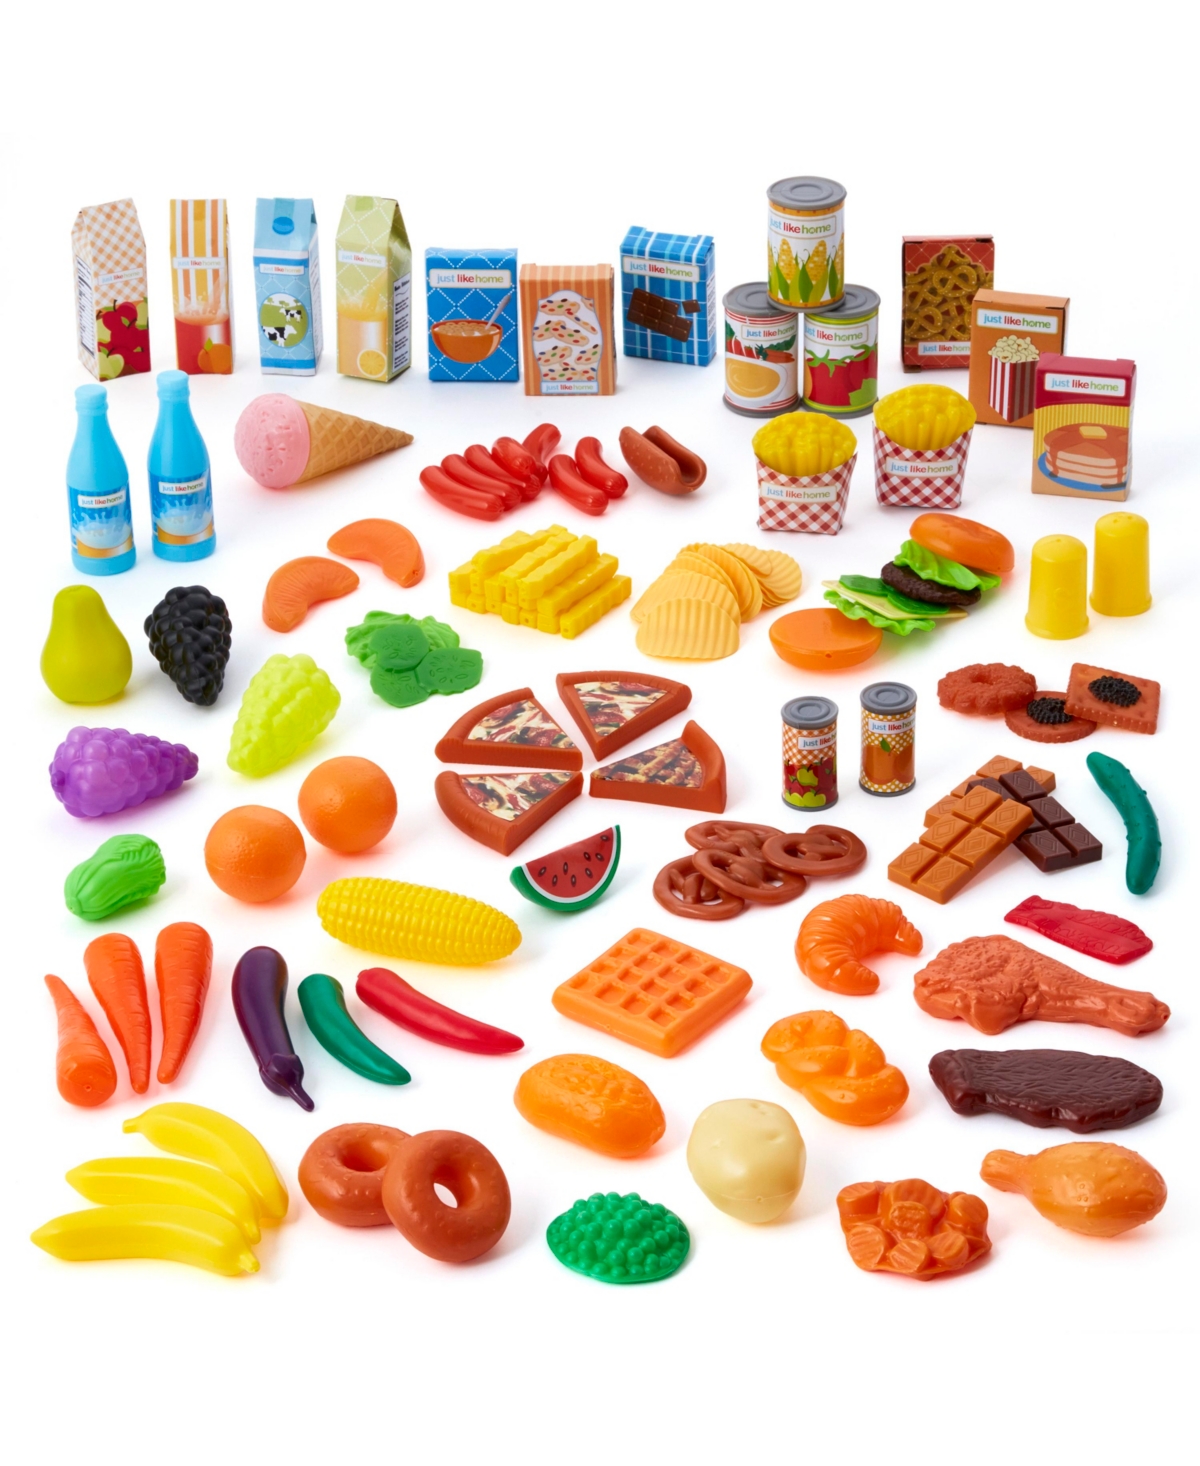 Deluxe Play food Set, Created for You by Toys R Us